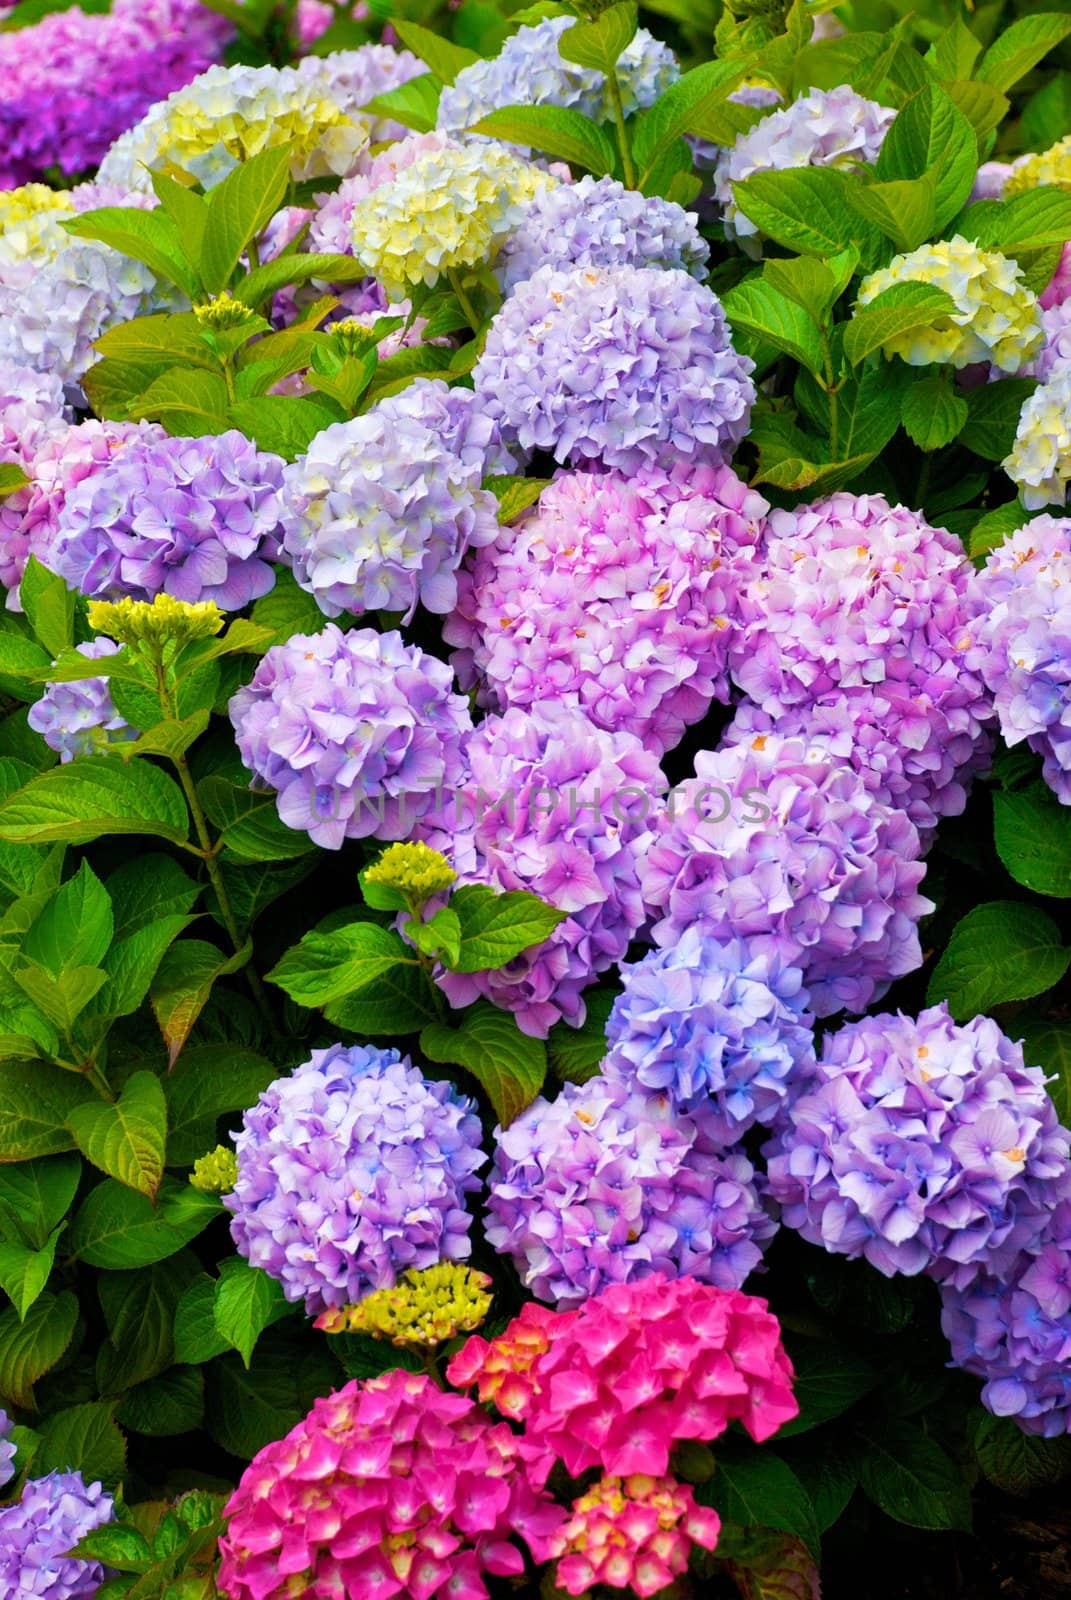 Multi Colored Hydrangea Bush With Blooms by pixelsnap